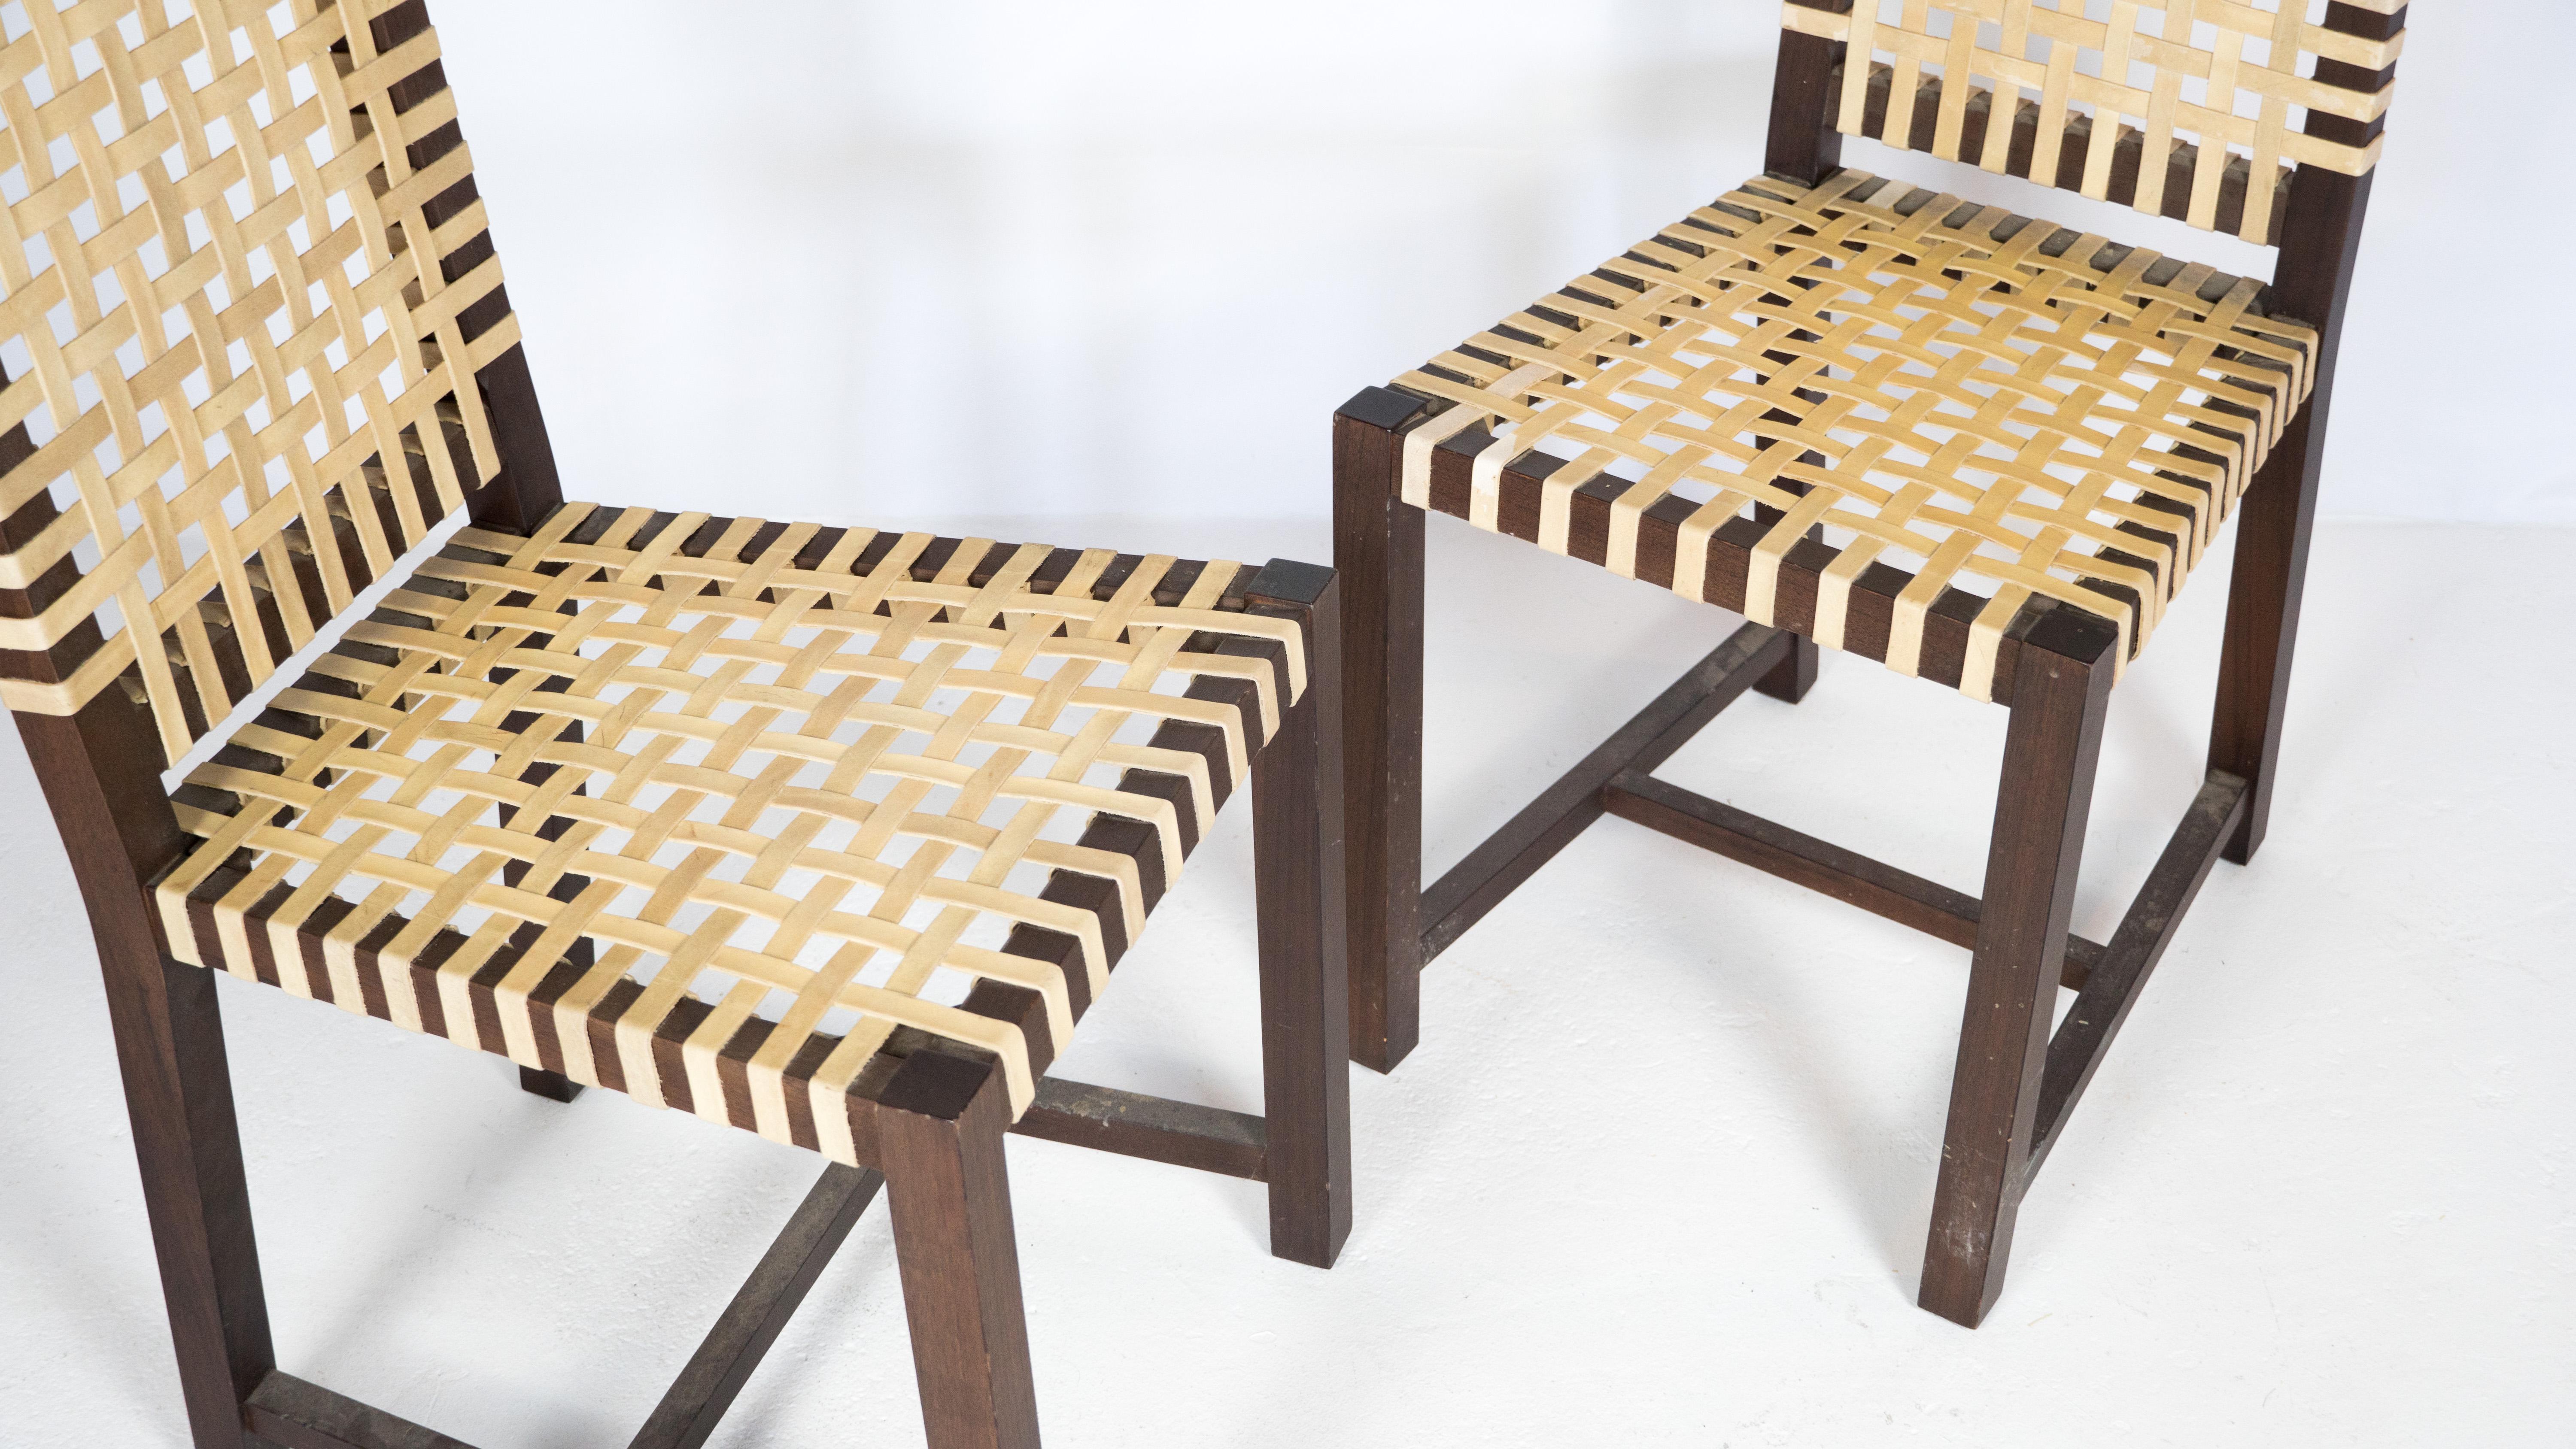 1980s Italian Architectural Otto 121' High Back Chairs by Paola Navone for Gerva For Sale 6